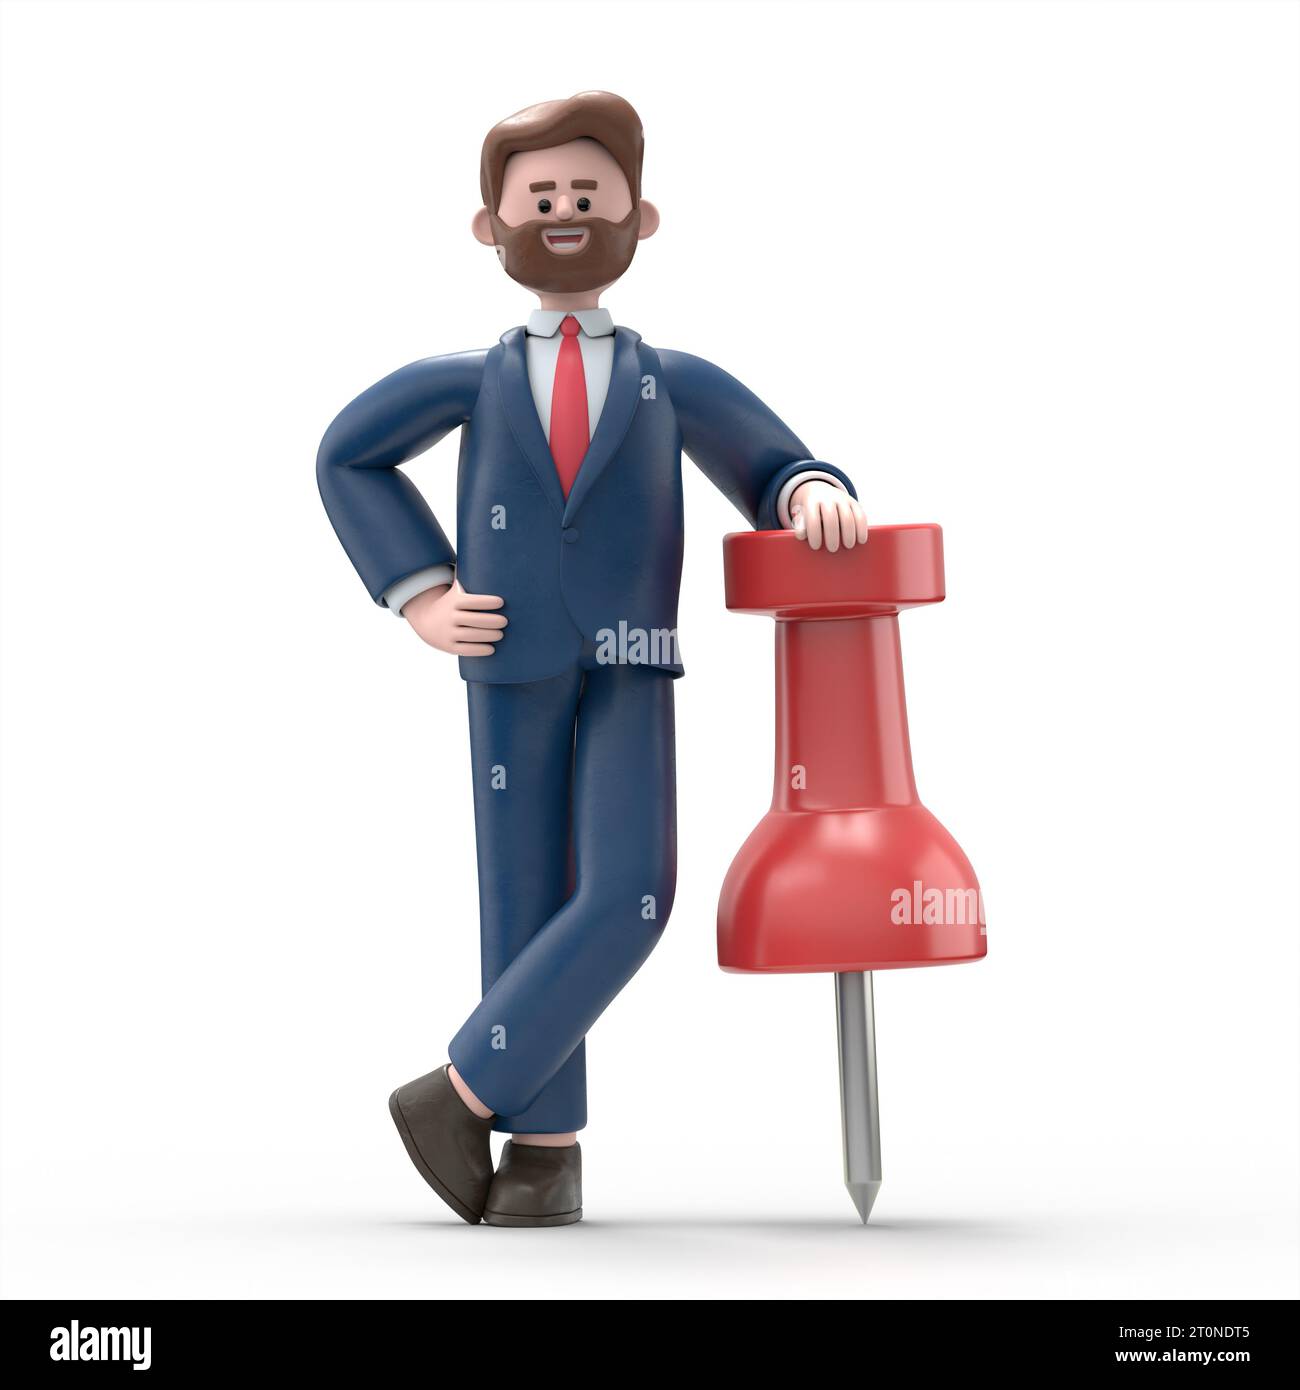 3D illustration of american businessman Bob figure with pin needle.3D rendering on white background. Stock Photo